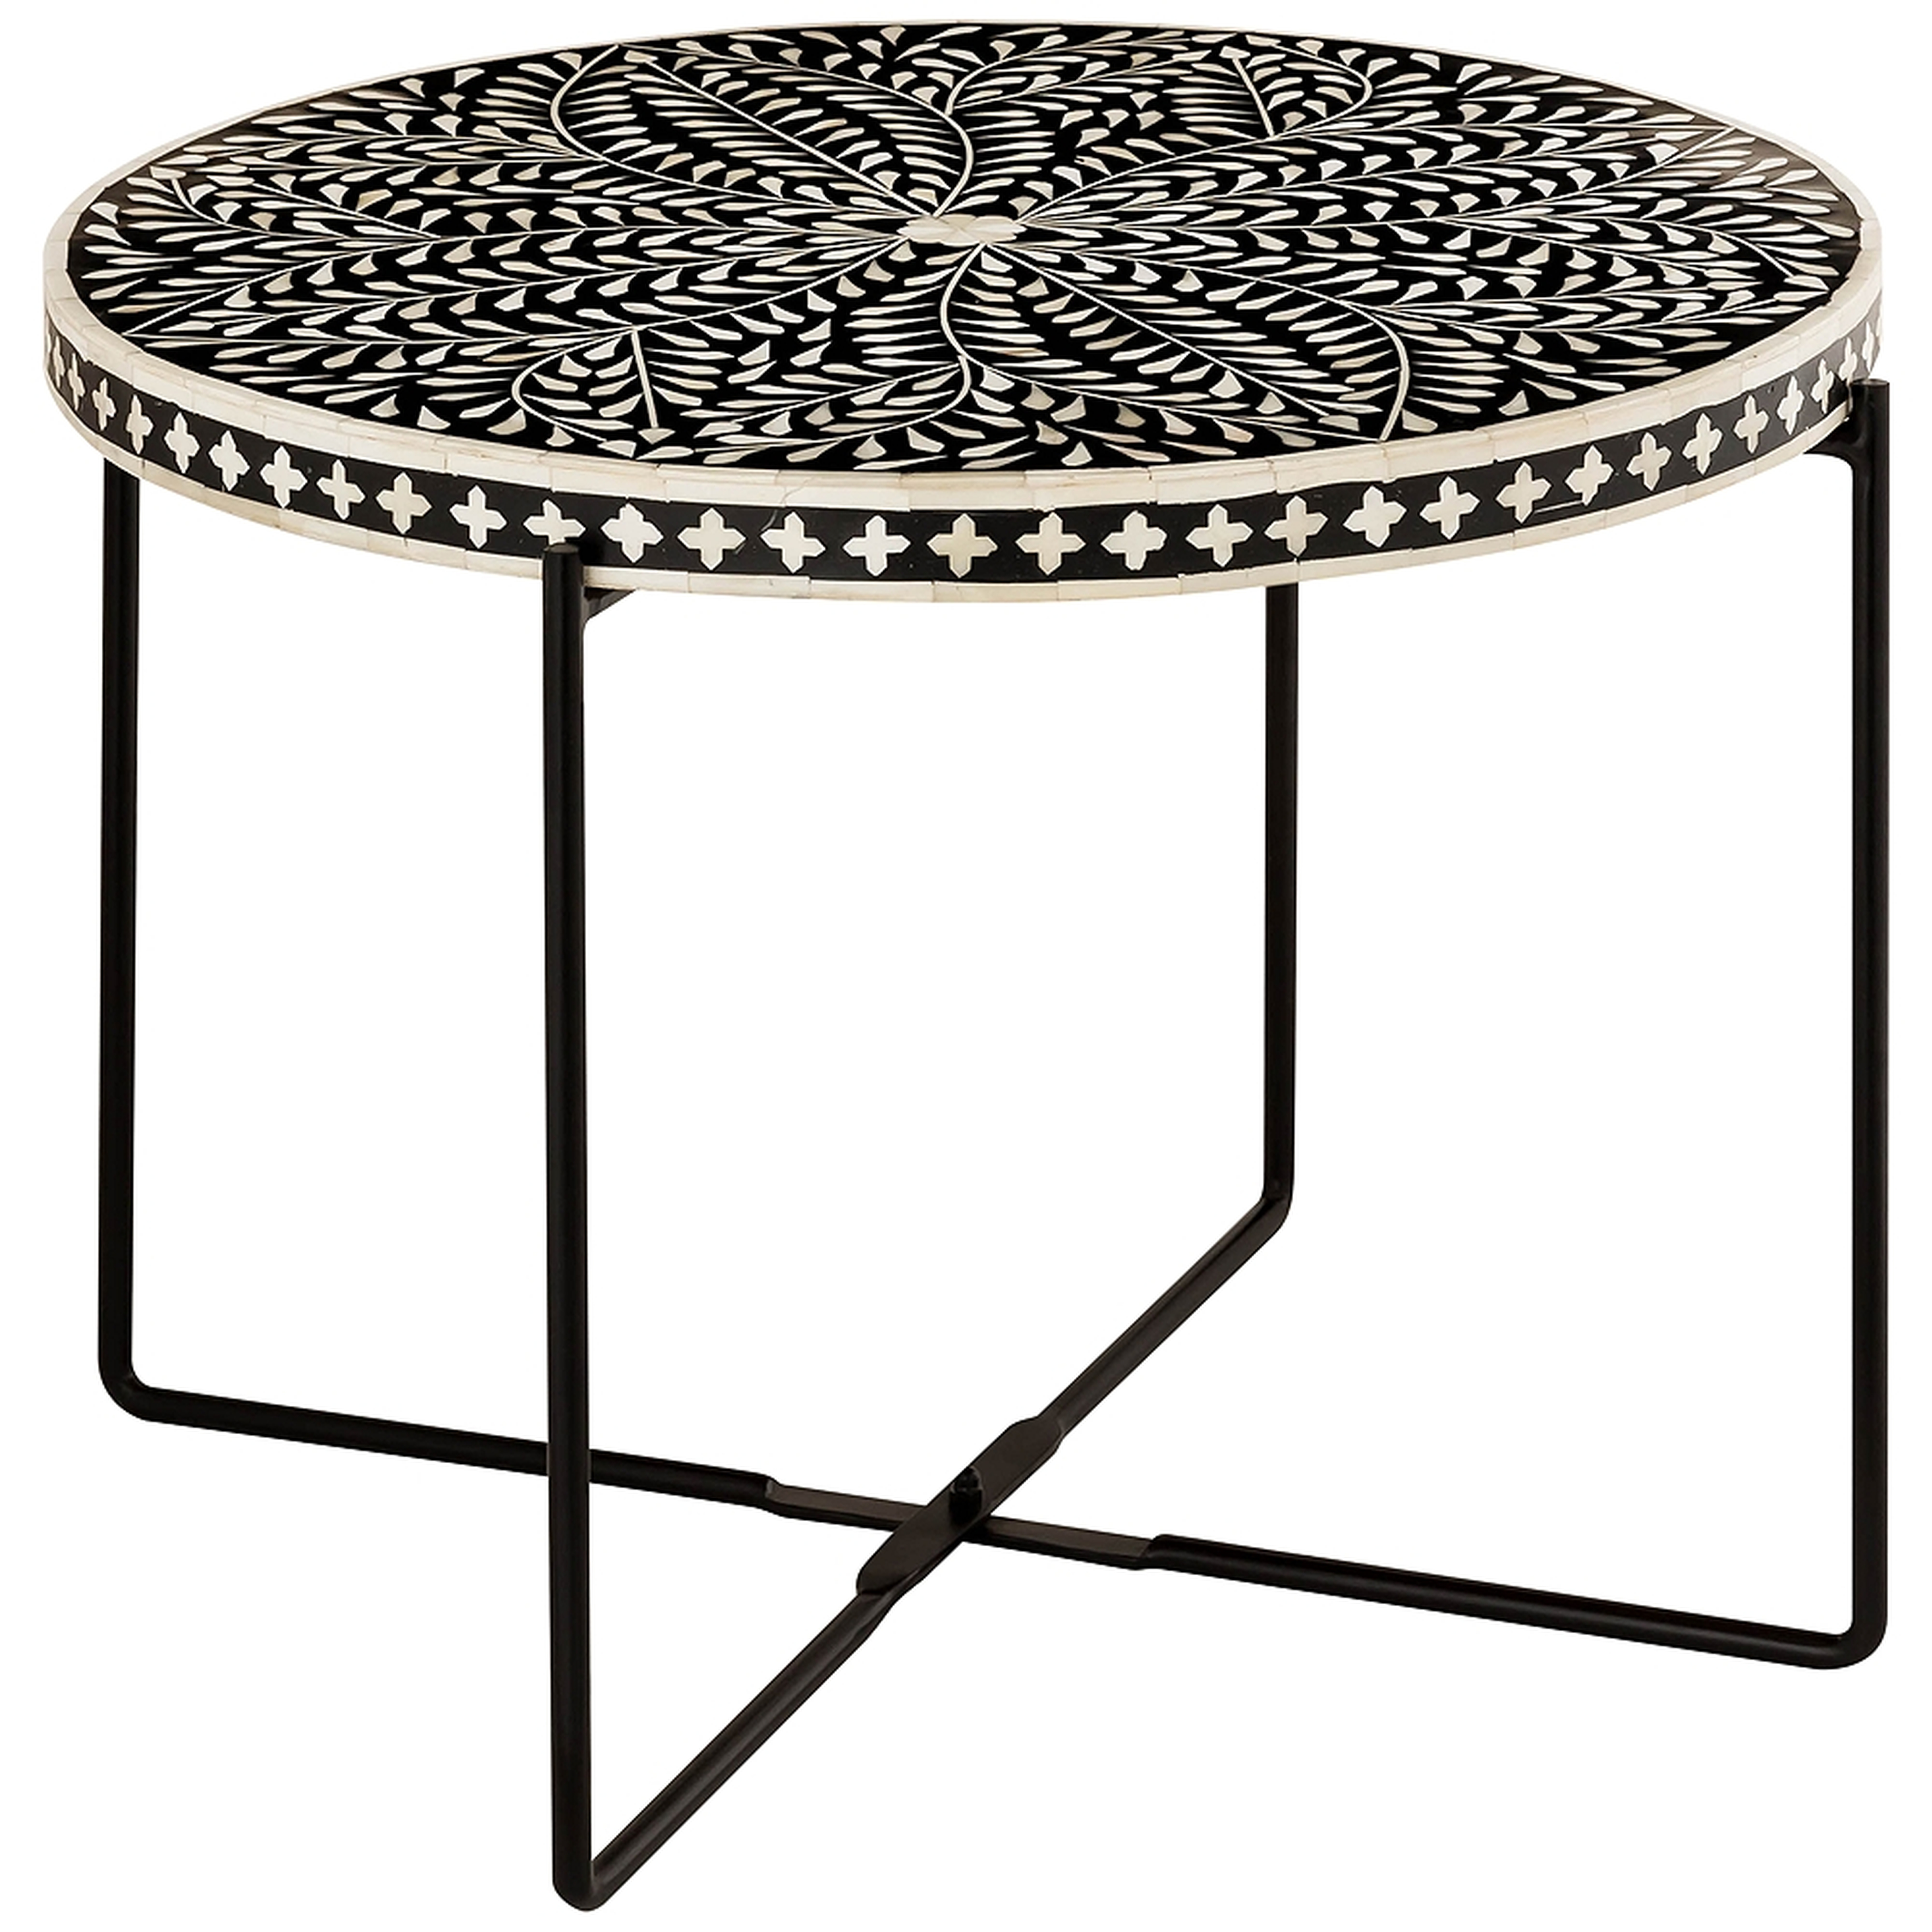 Regina 24"W Black and White Bone-Inlay Round Cocktail Table - Style # 80P49 - Lamps Plus